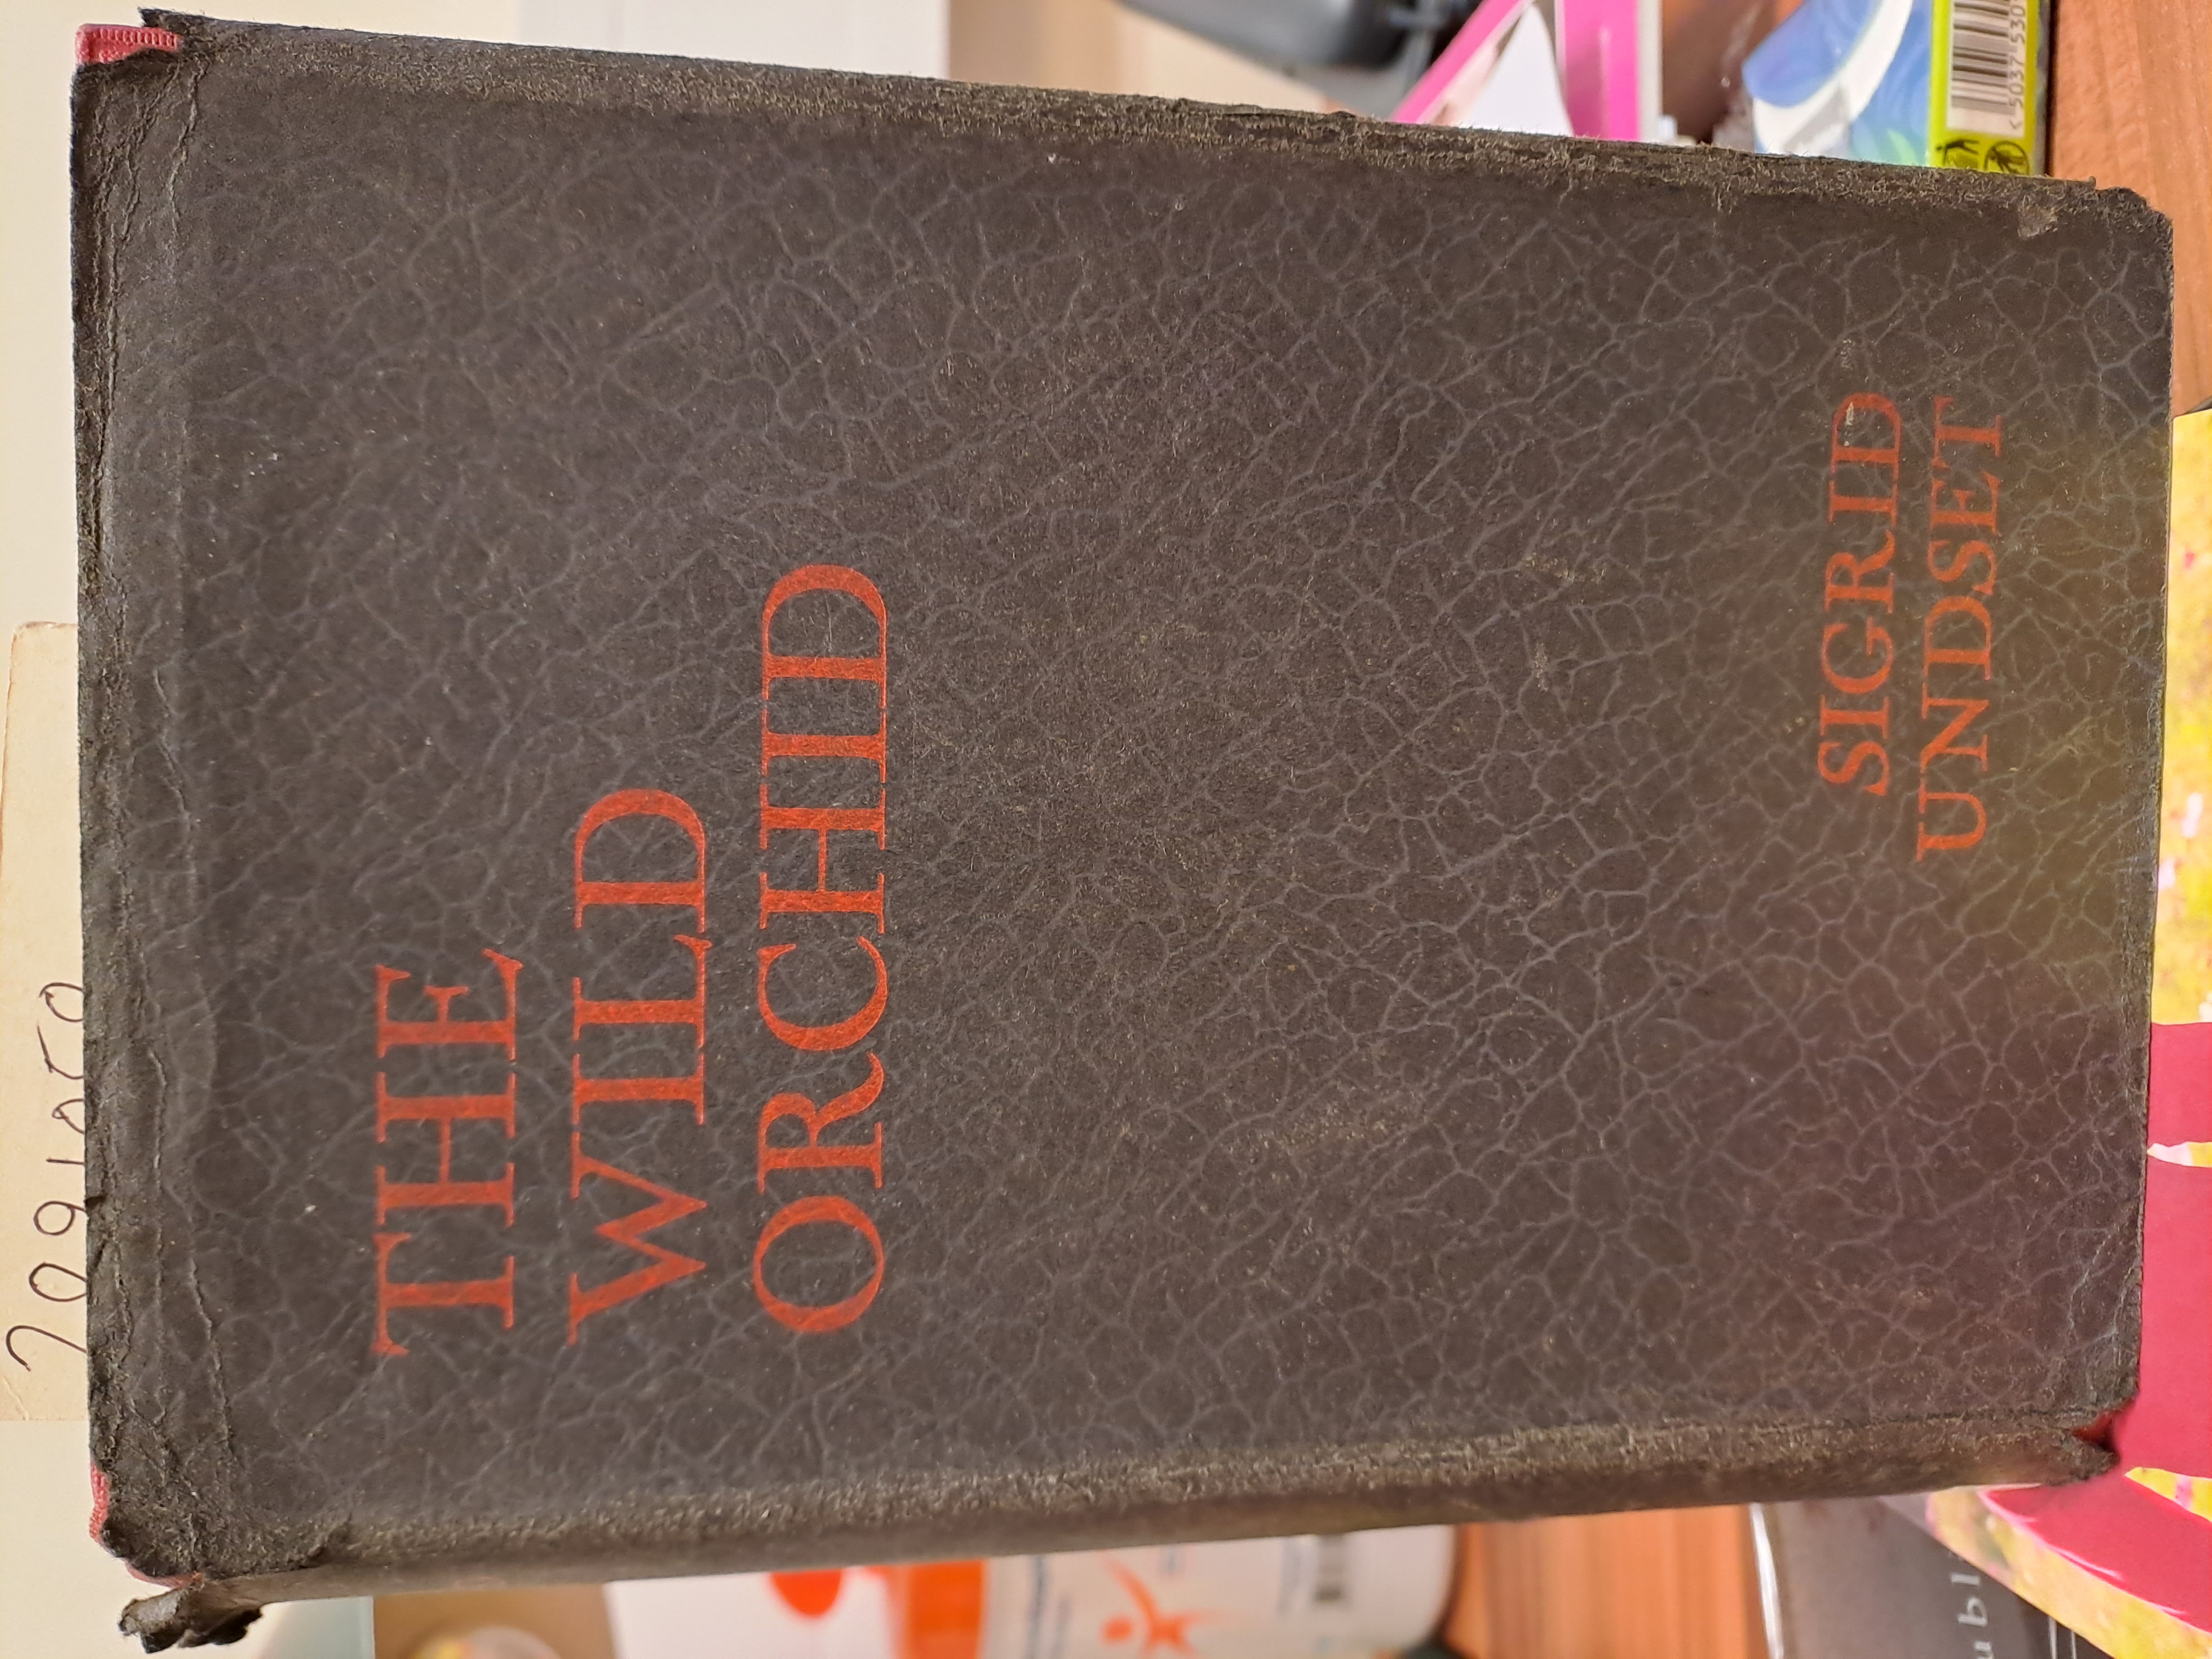 Most of the literary fiction titles in the Library's collection are hardbacks, but few remain where the dust jacket has survived. This is an example of one of the many titles by Norwegian author Sigrid Undset that the RCB Library holds in its collection. Undset is another example of an author that fled their home country in order to avoid Nazi persecution.